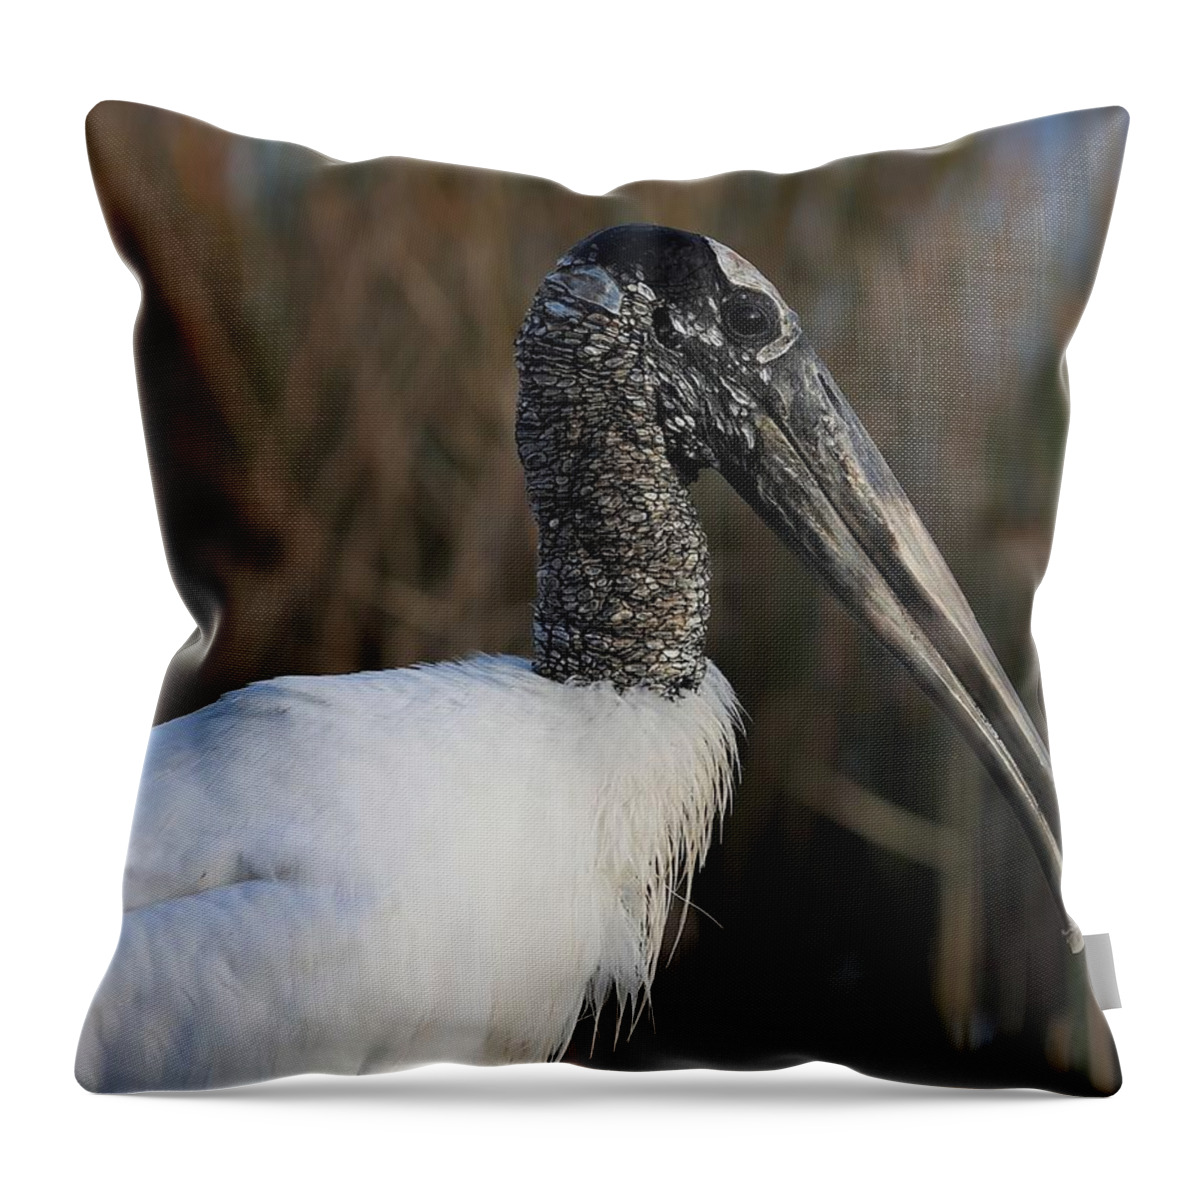 Wood Storks Throw Pillow featuring the photograph Scaly Neck and Head by Mingming Jiang